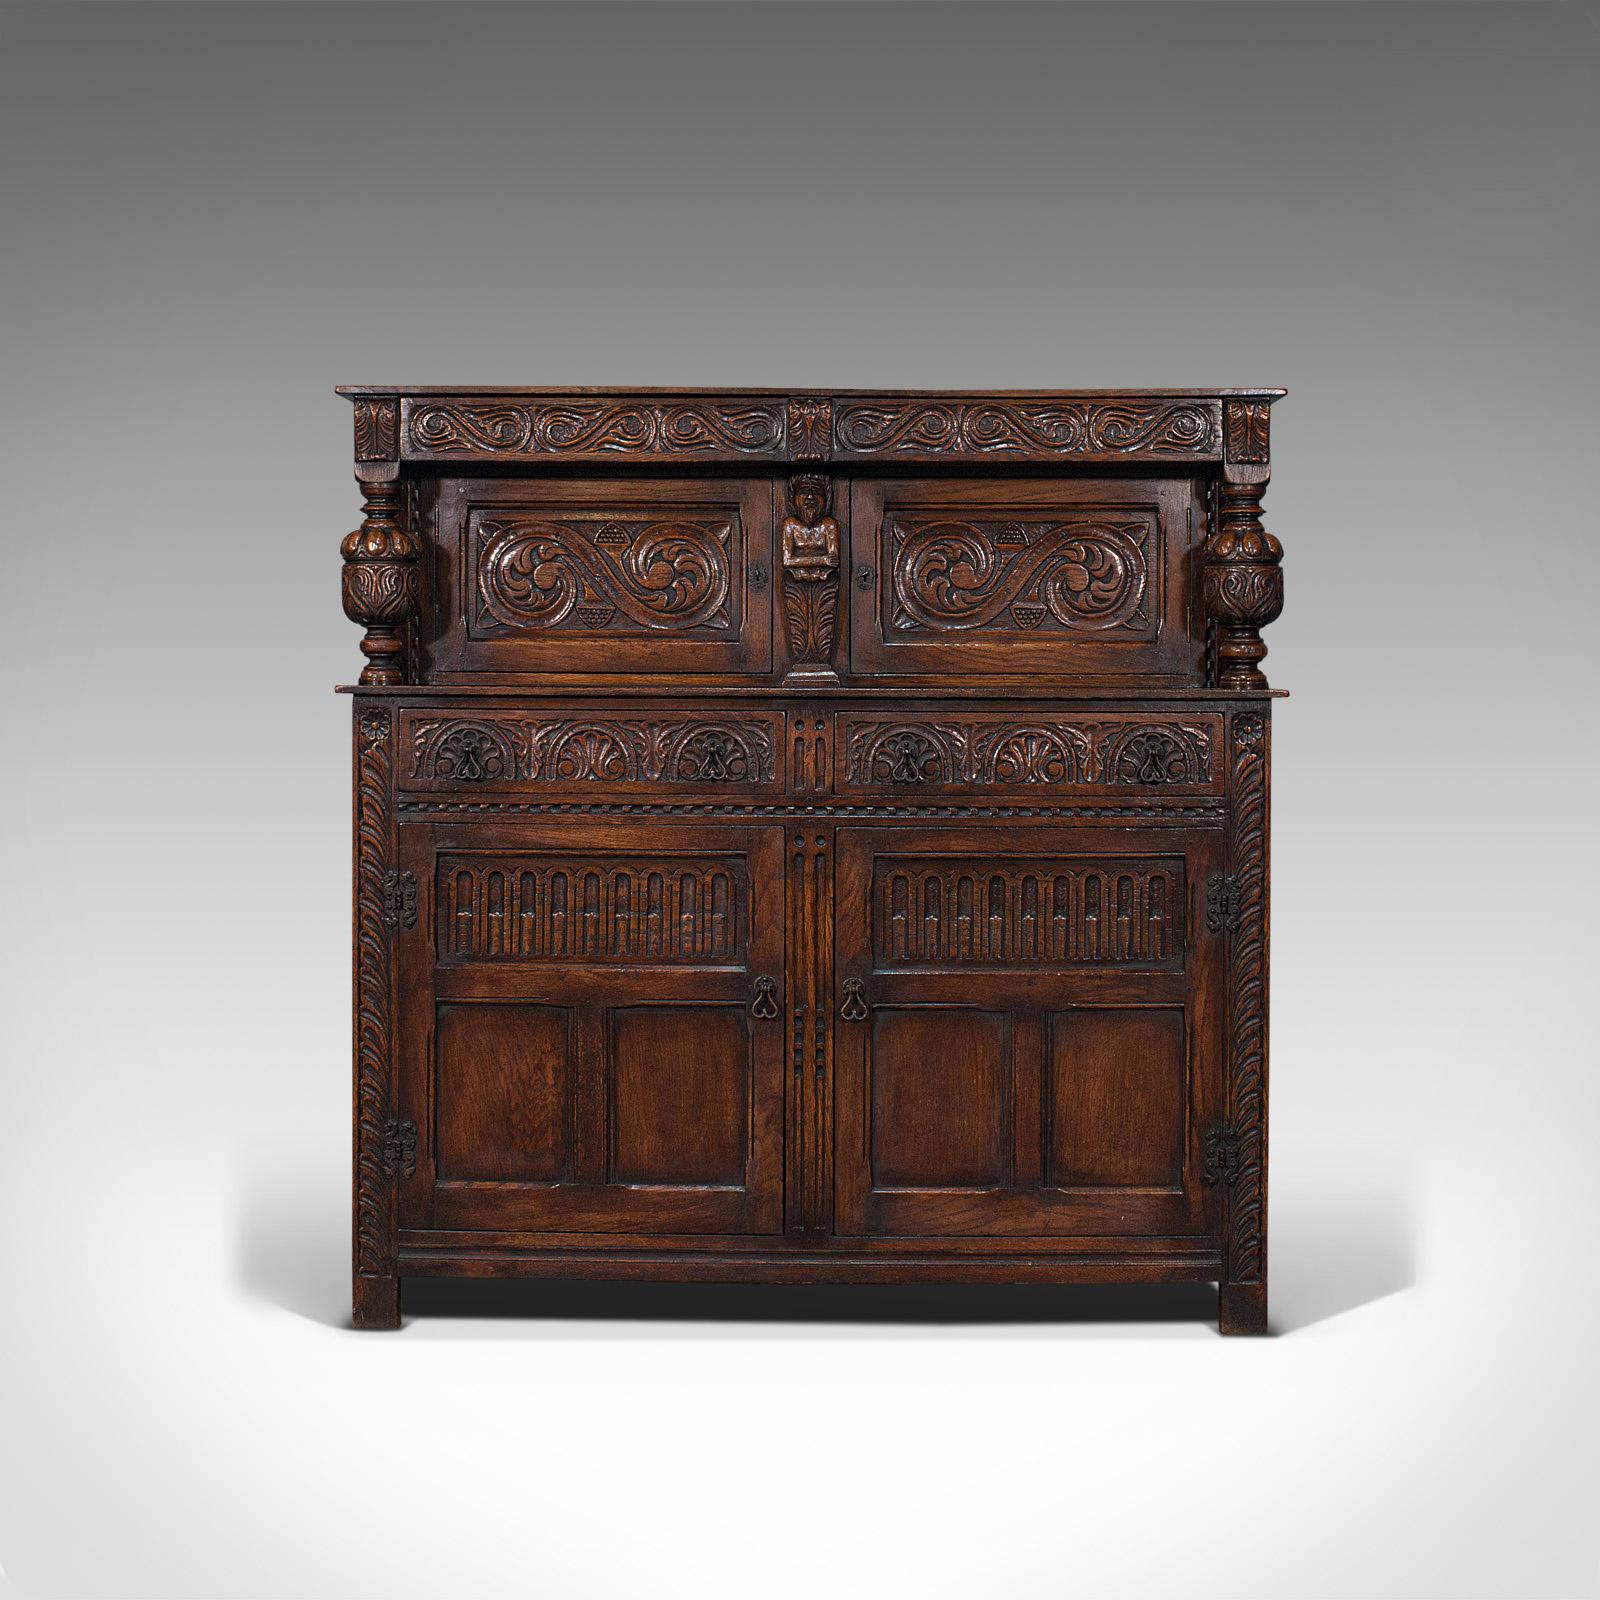 This is an antique court cabinet. An English, oak sideboard or credenza in Jacobean revival taste, dating to the late Victorian period, circa 1890.

Impressive cabinet with fine carved details
Displaying a desirable aged patina
Select oak shows